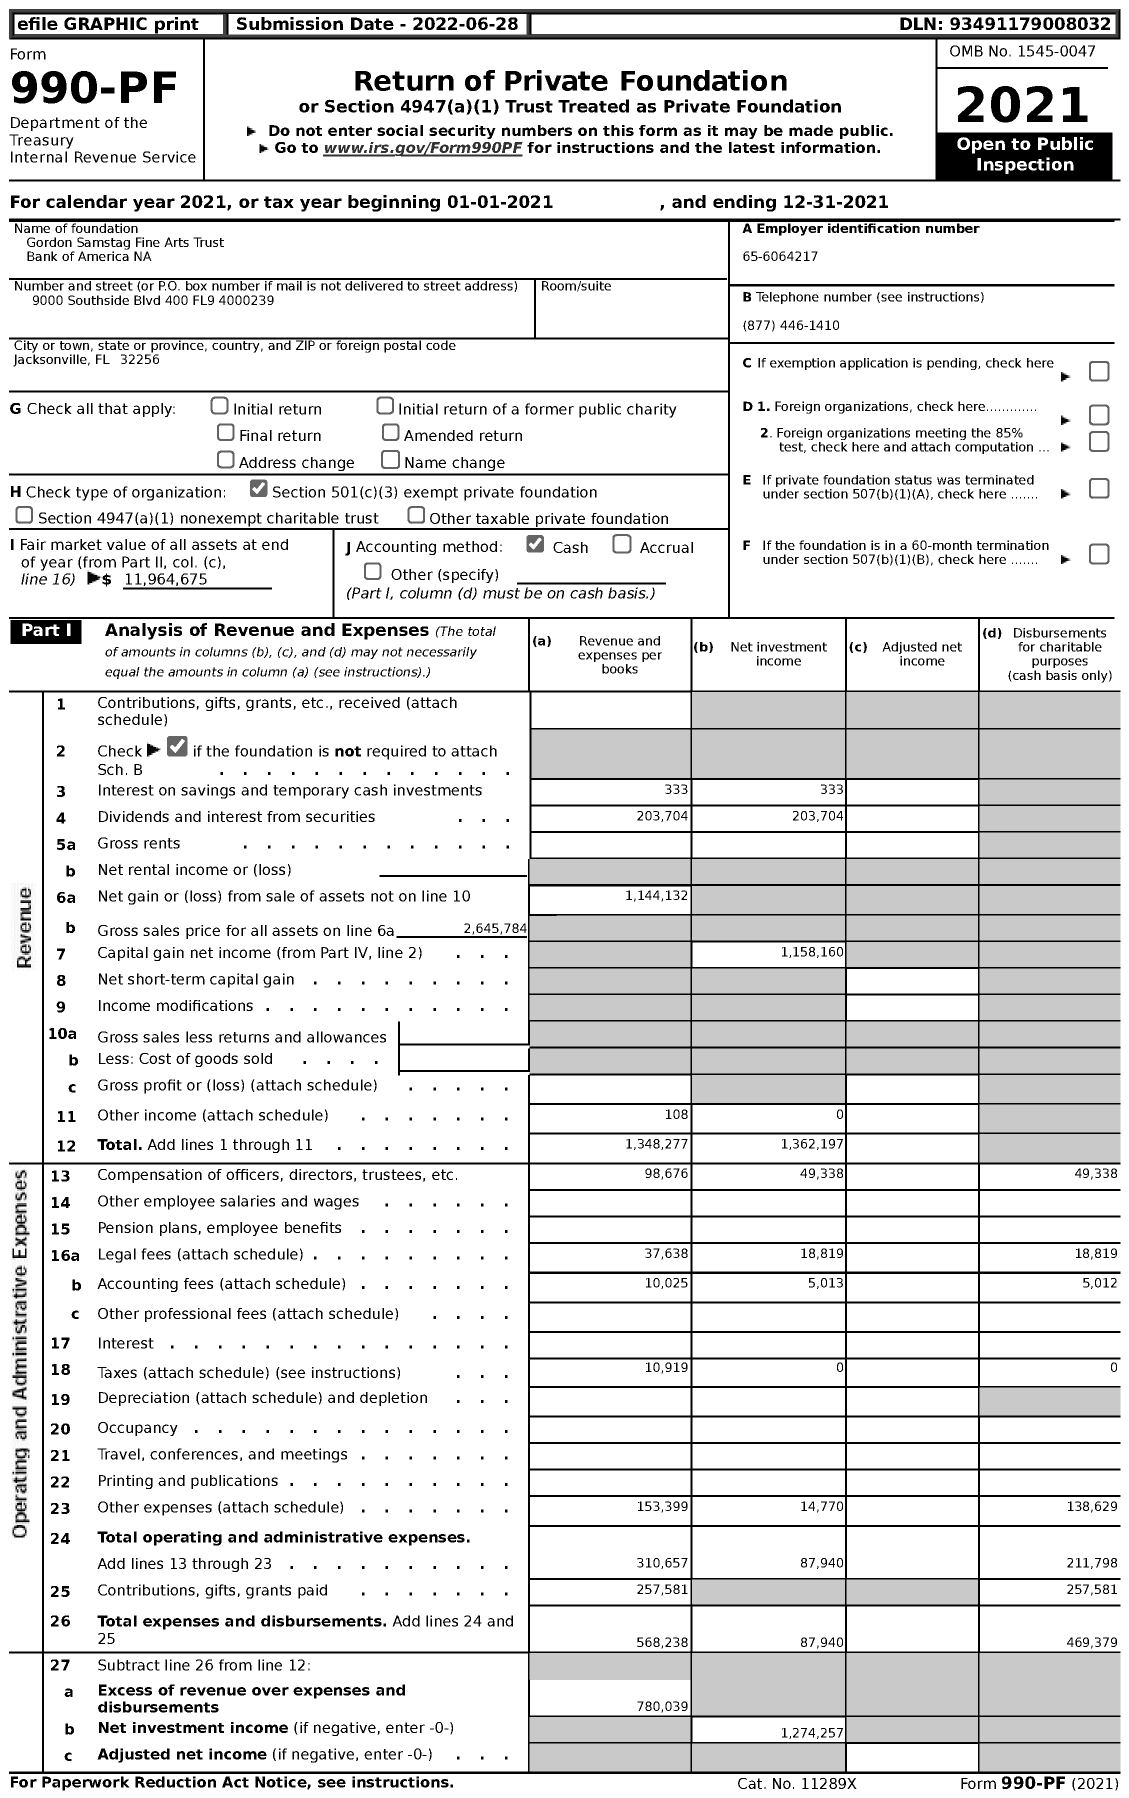 Image of first page of 2021 Form 990PF for Gordon Samstag Fine Arts Trust Bank of America NA